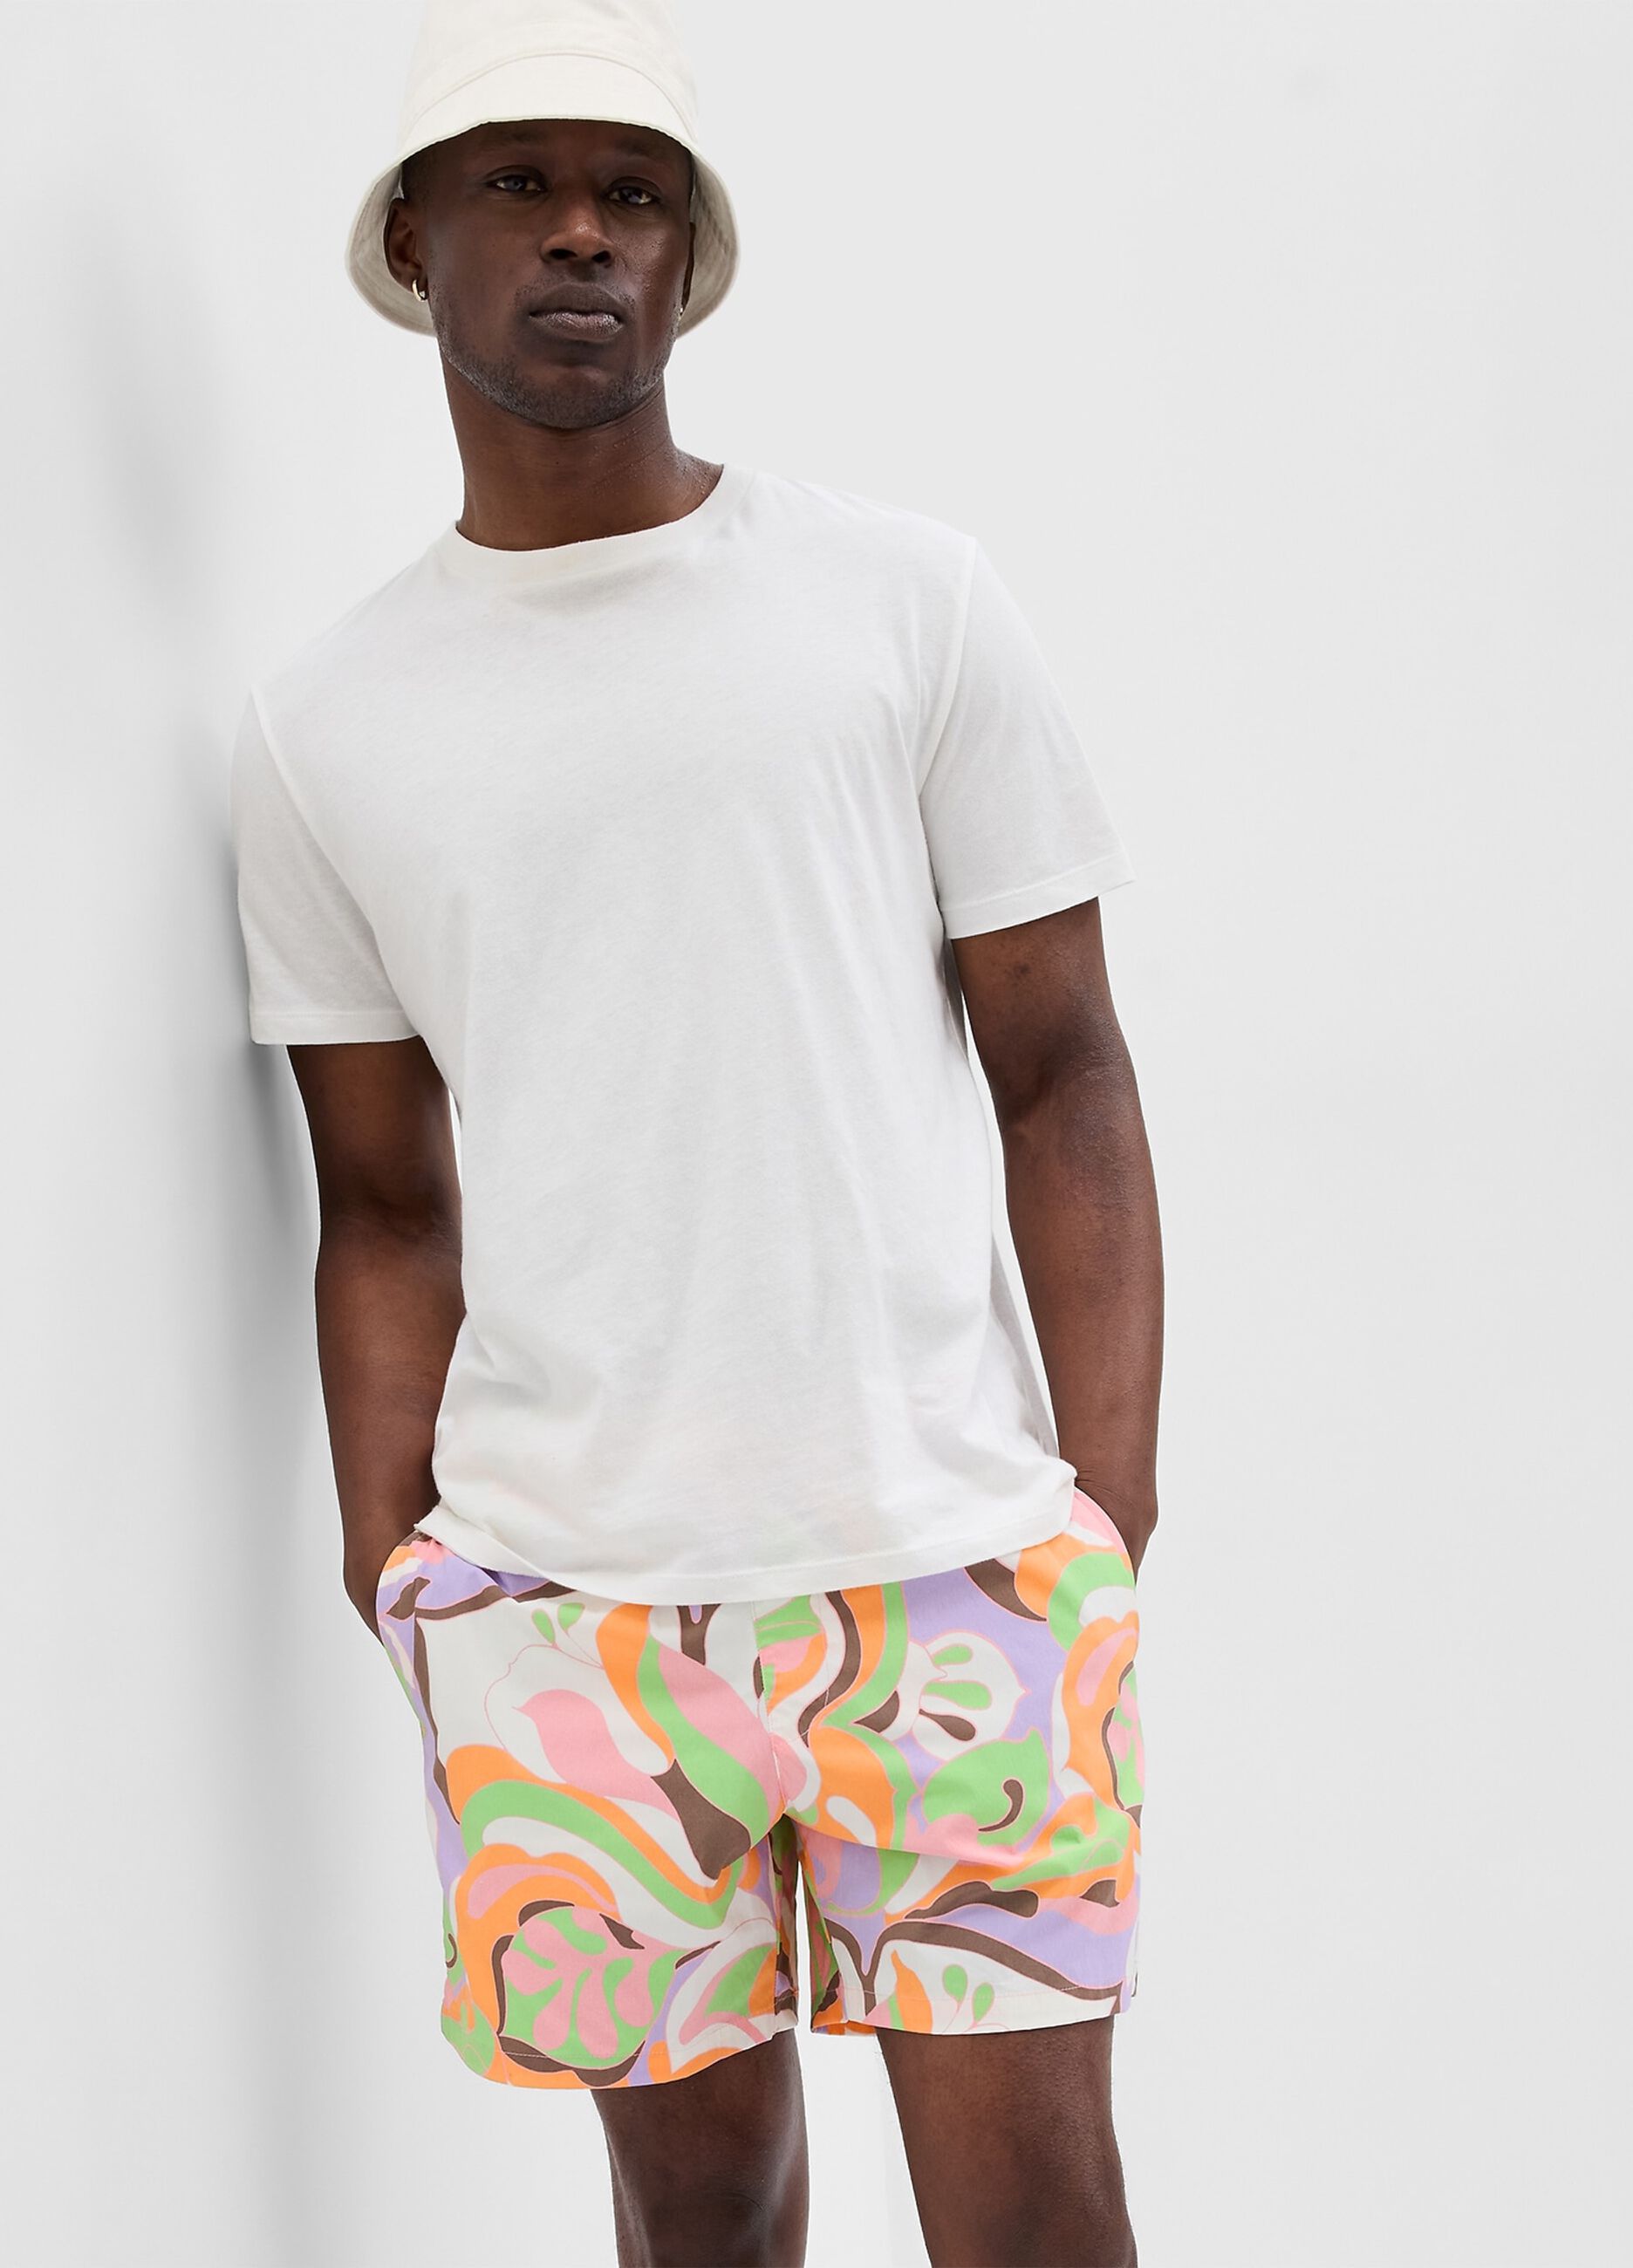 Swimming trunks with foliage print